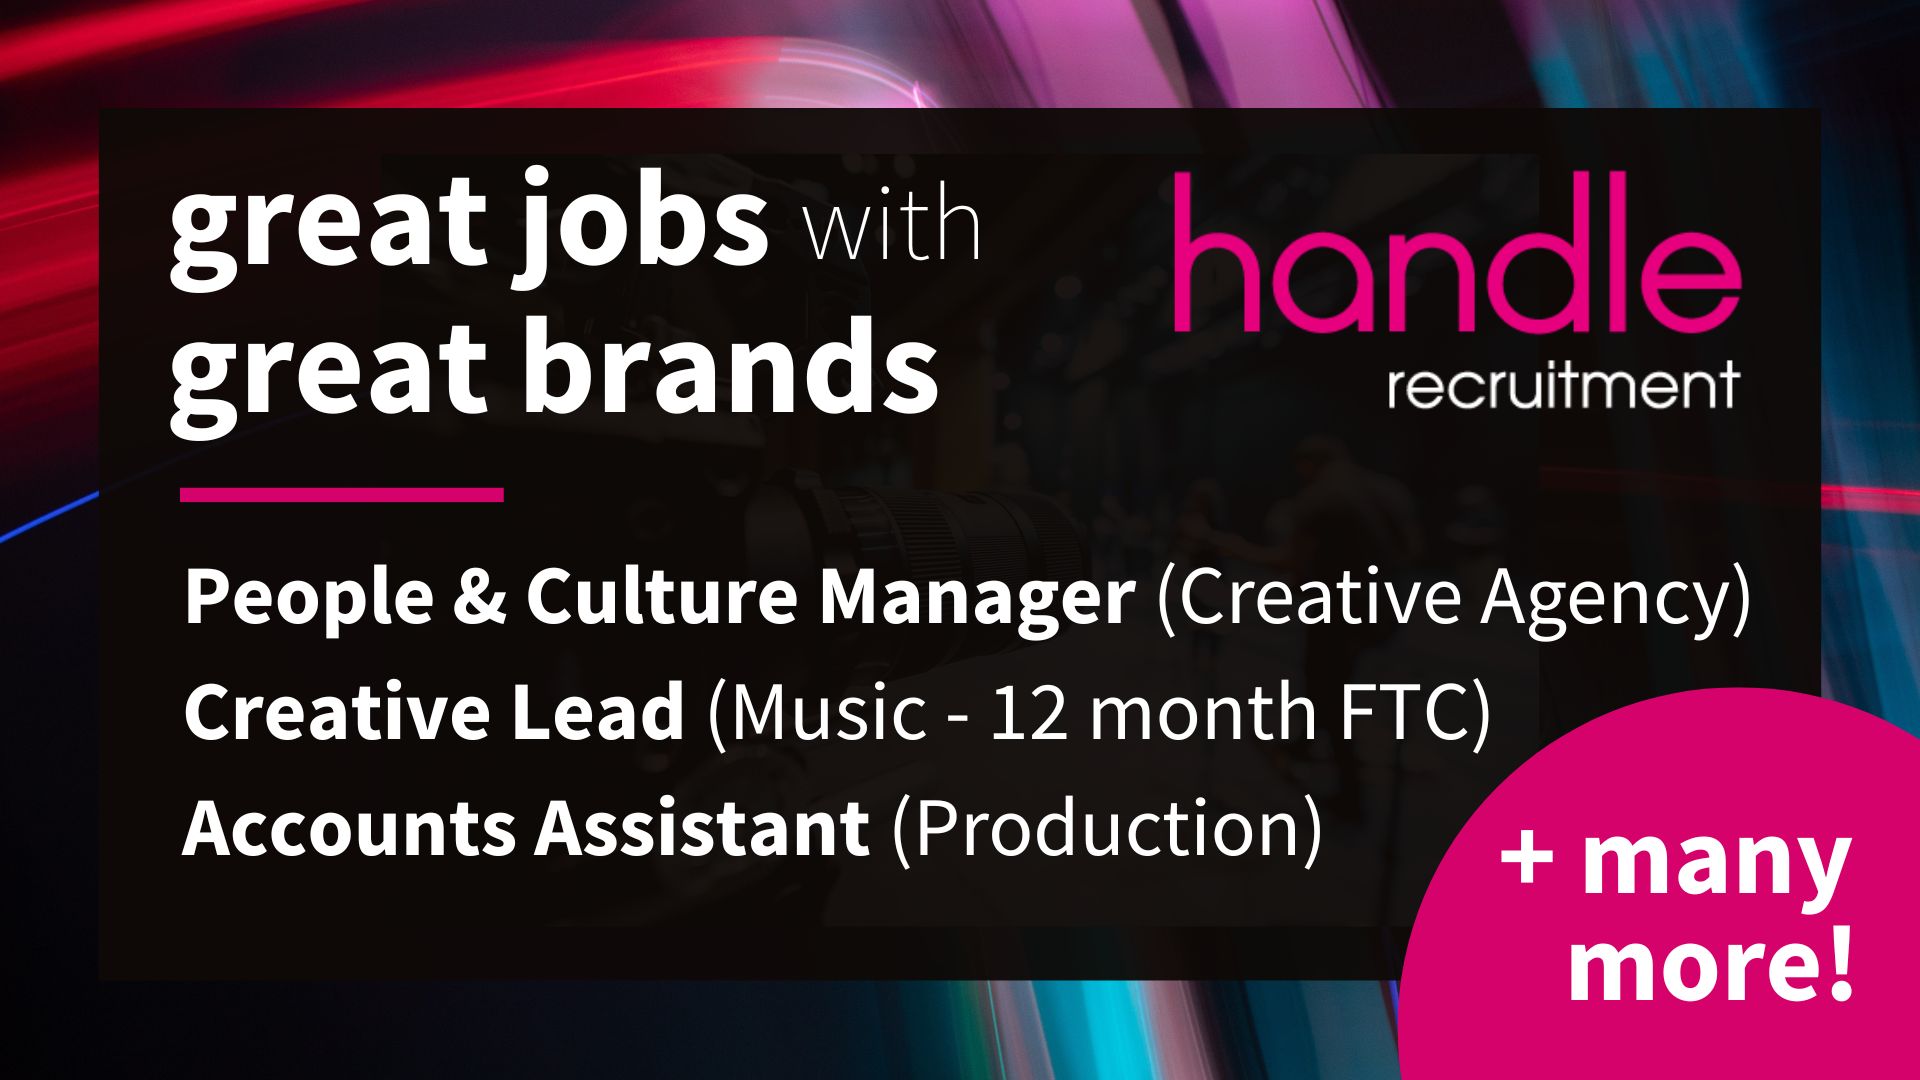 Our latest jobs in the creative industries - | Handle Recruitment